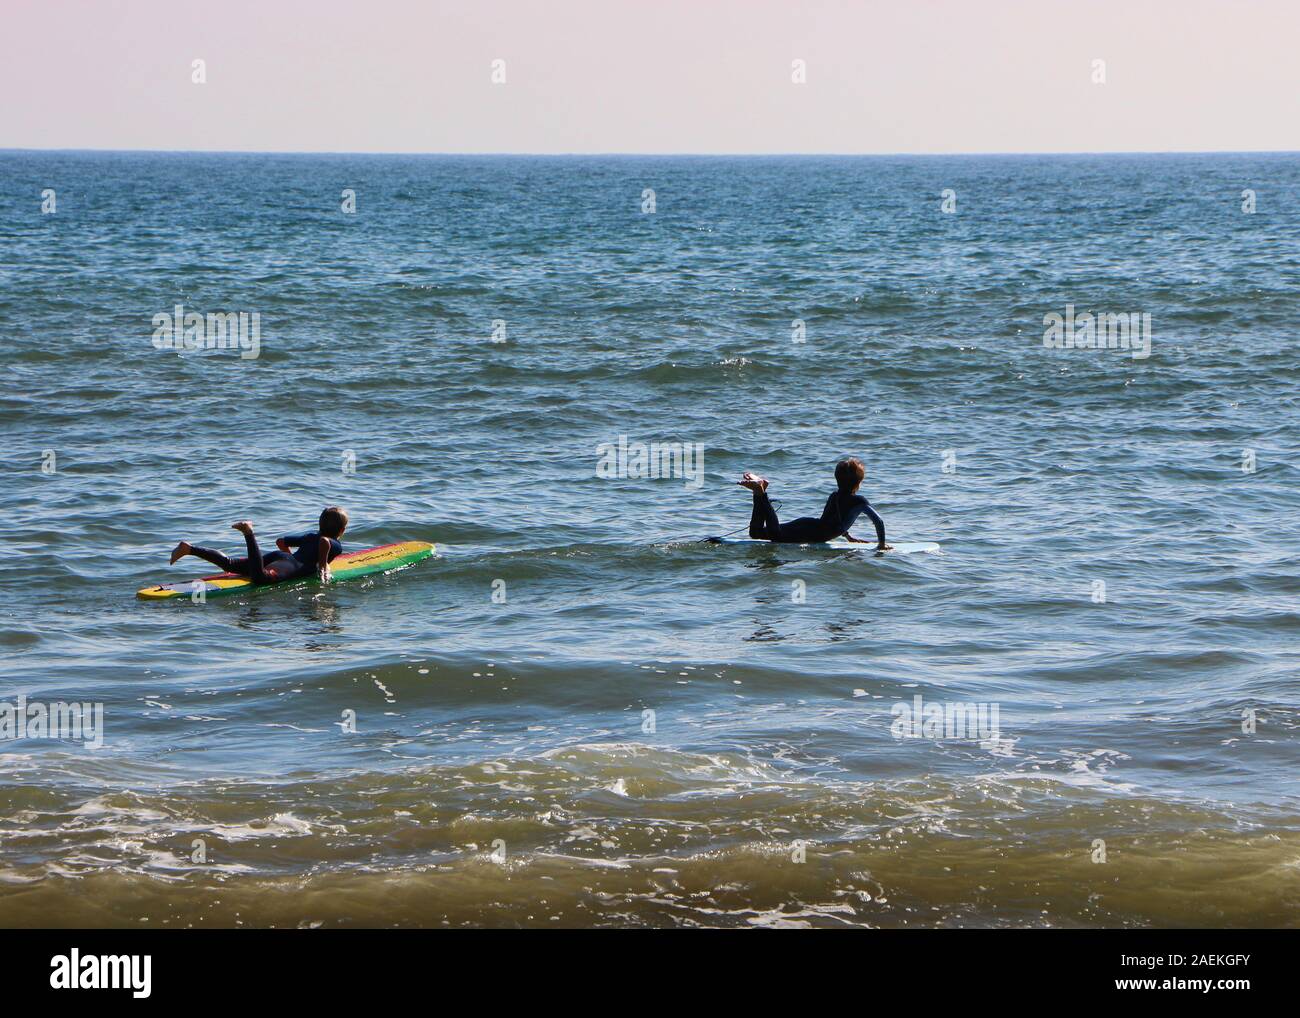 Two young surfers are excited heading towards the spiritual connection with the Pacific Ocean on Corral Canyon Beach, Malibu, CA 90265 Stock Photo